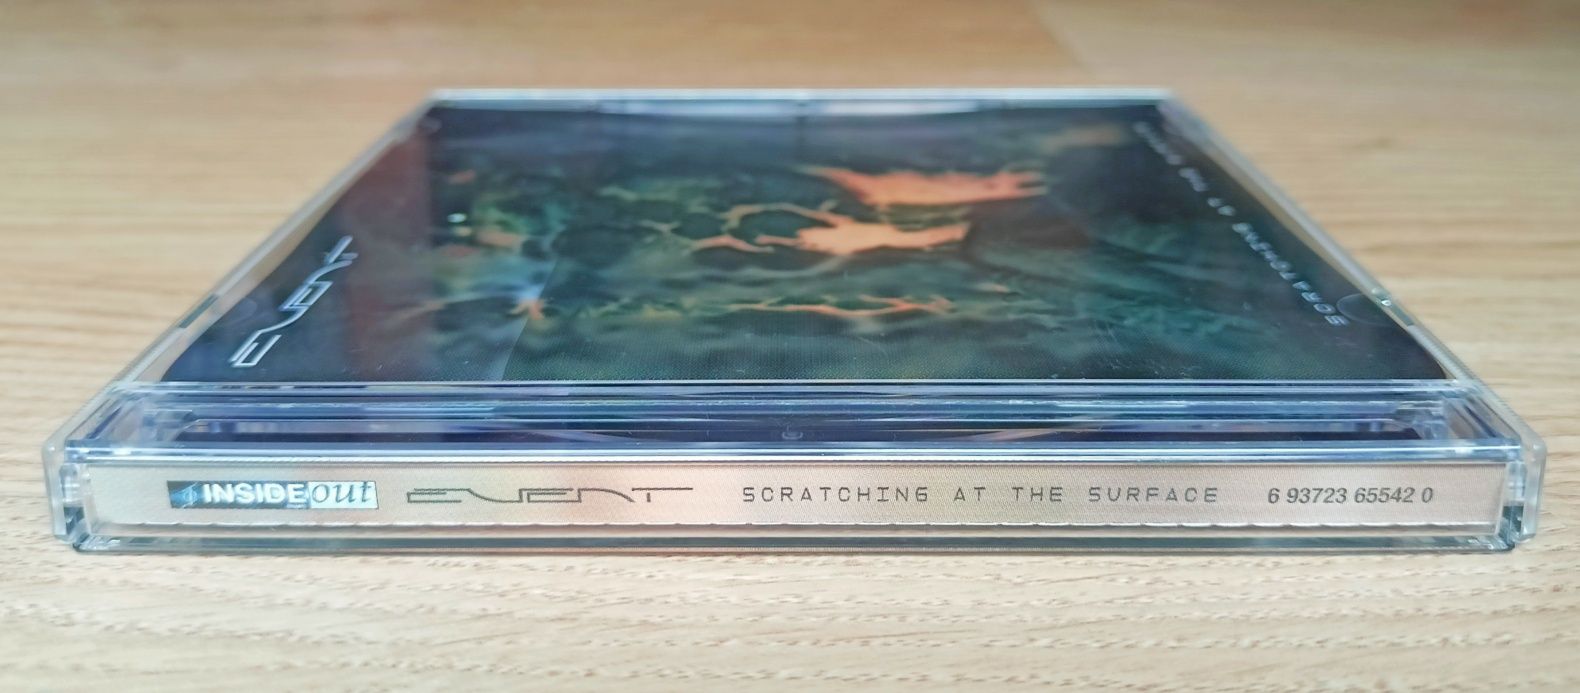 Event - Scratching At The Surface CD